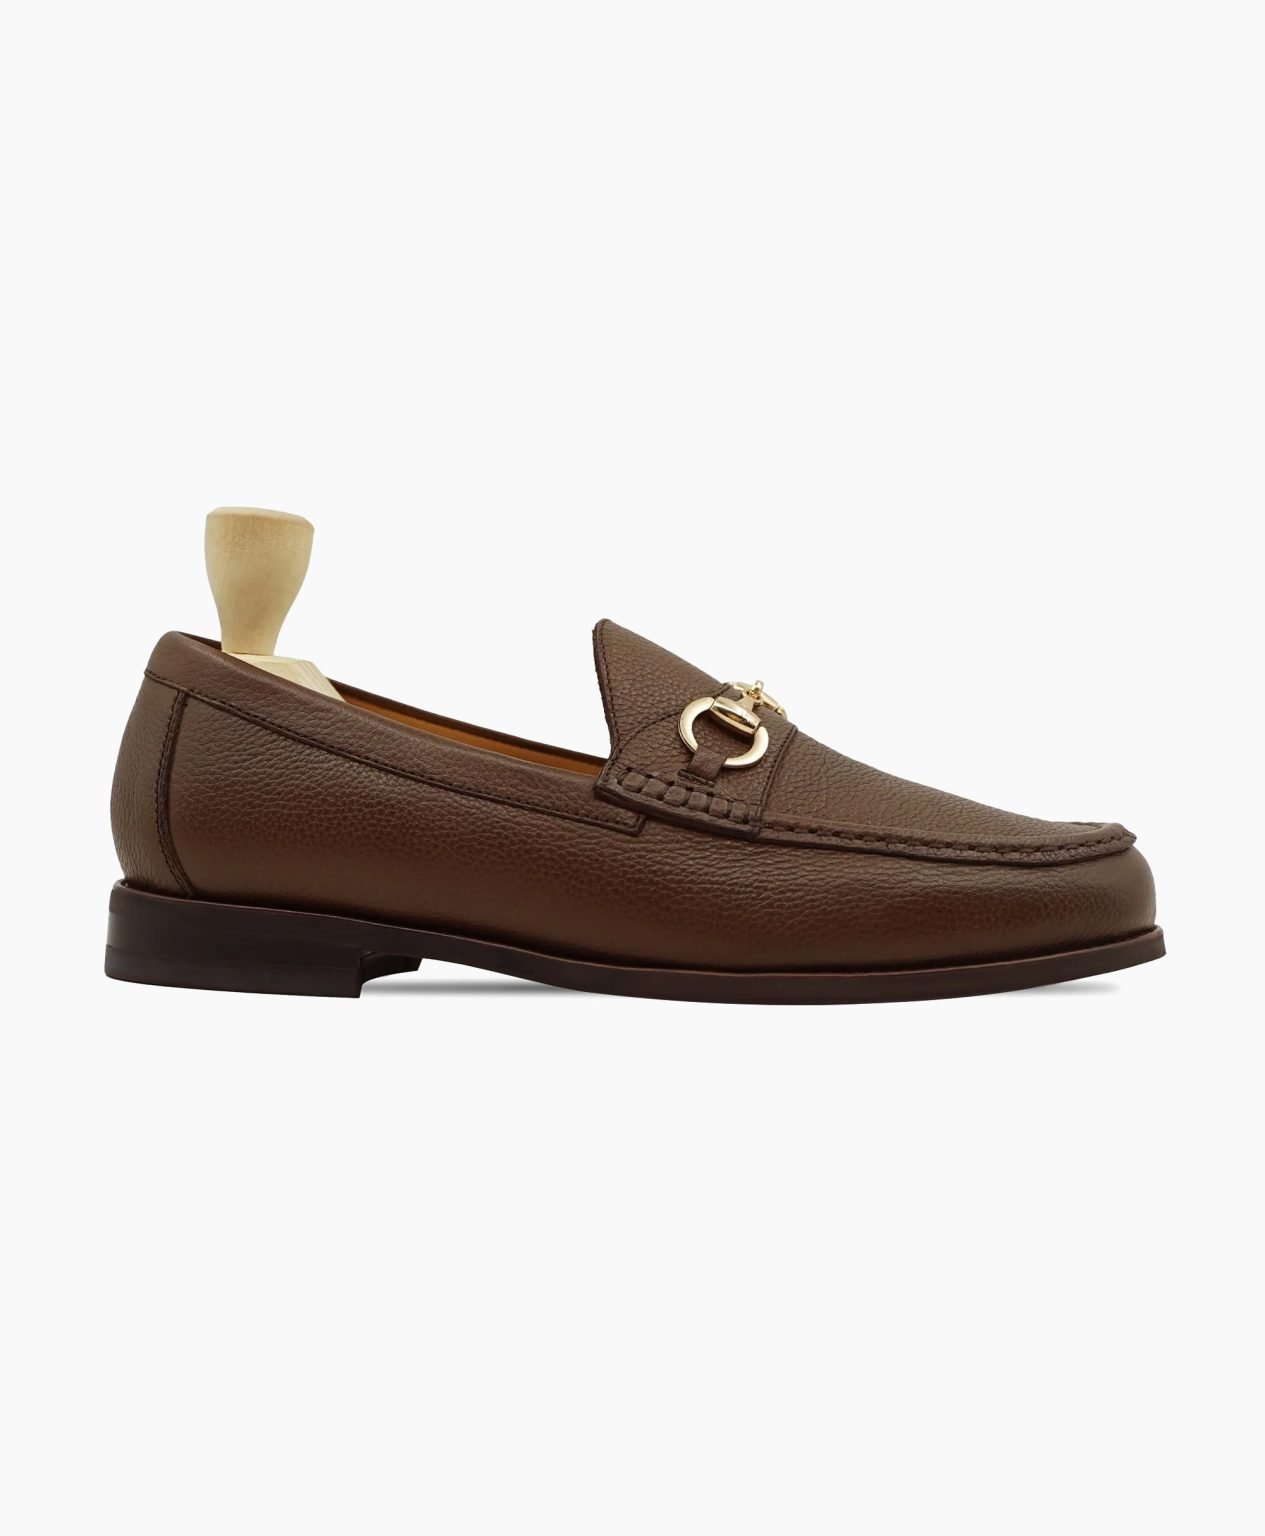 barnstaple-brown-leather-loafers-image201